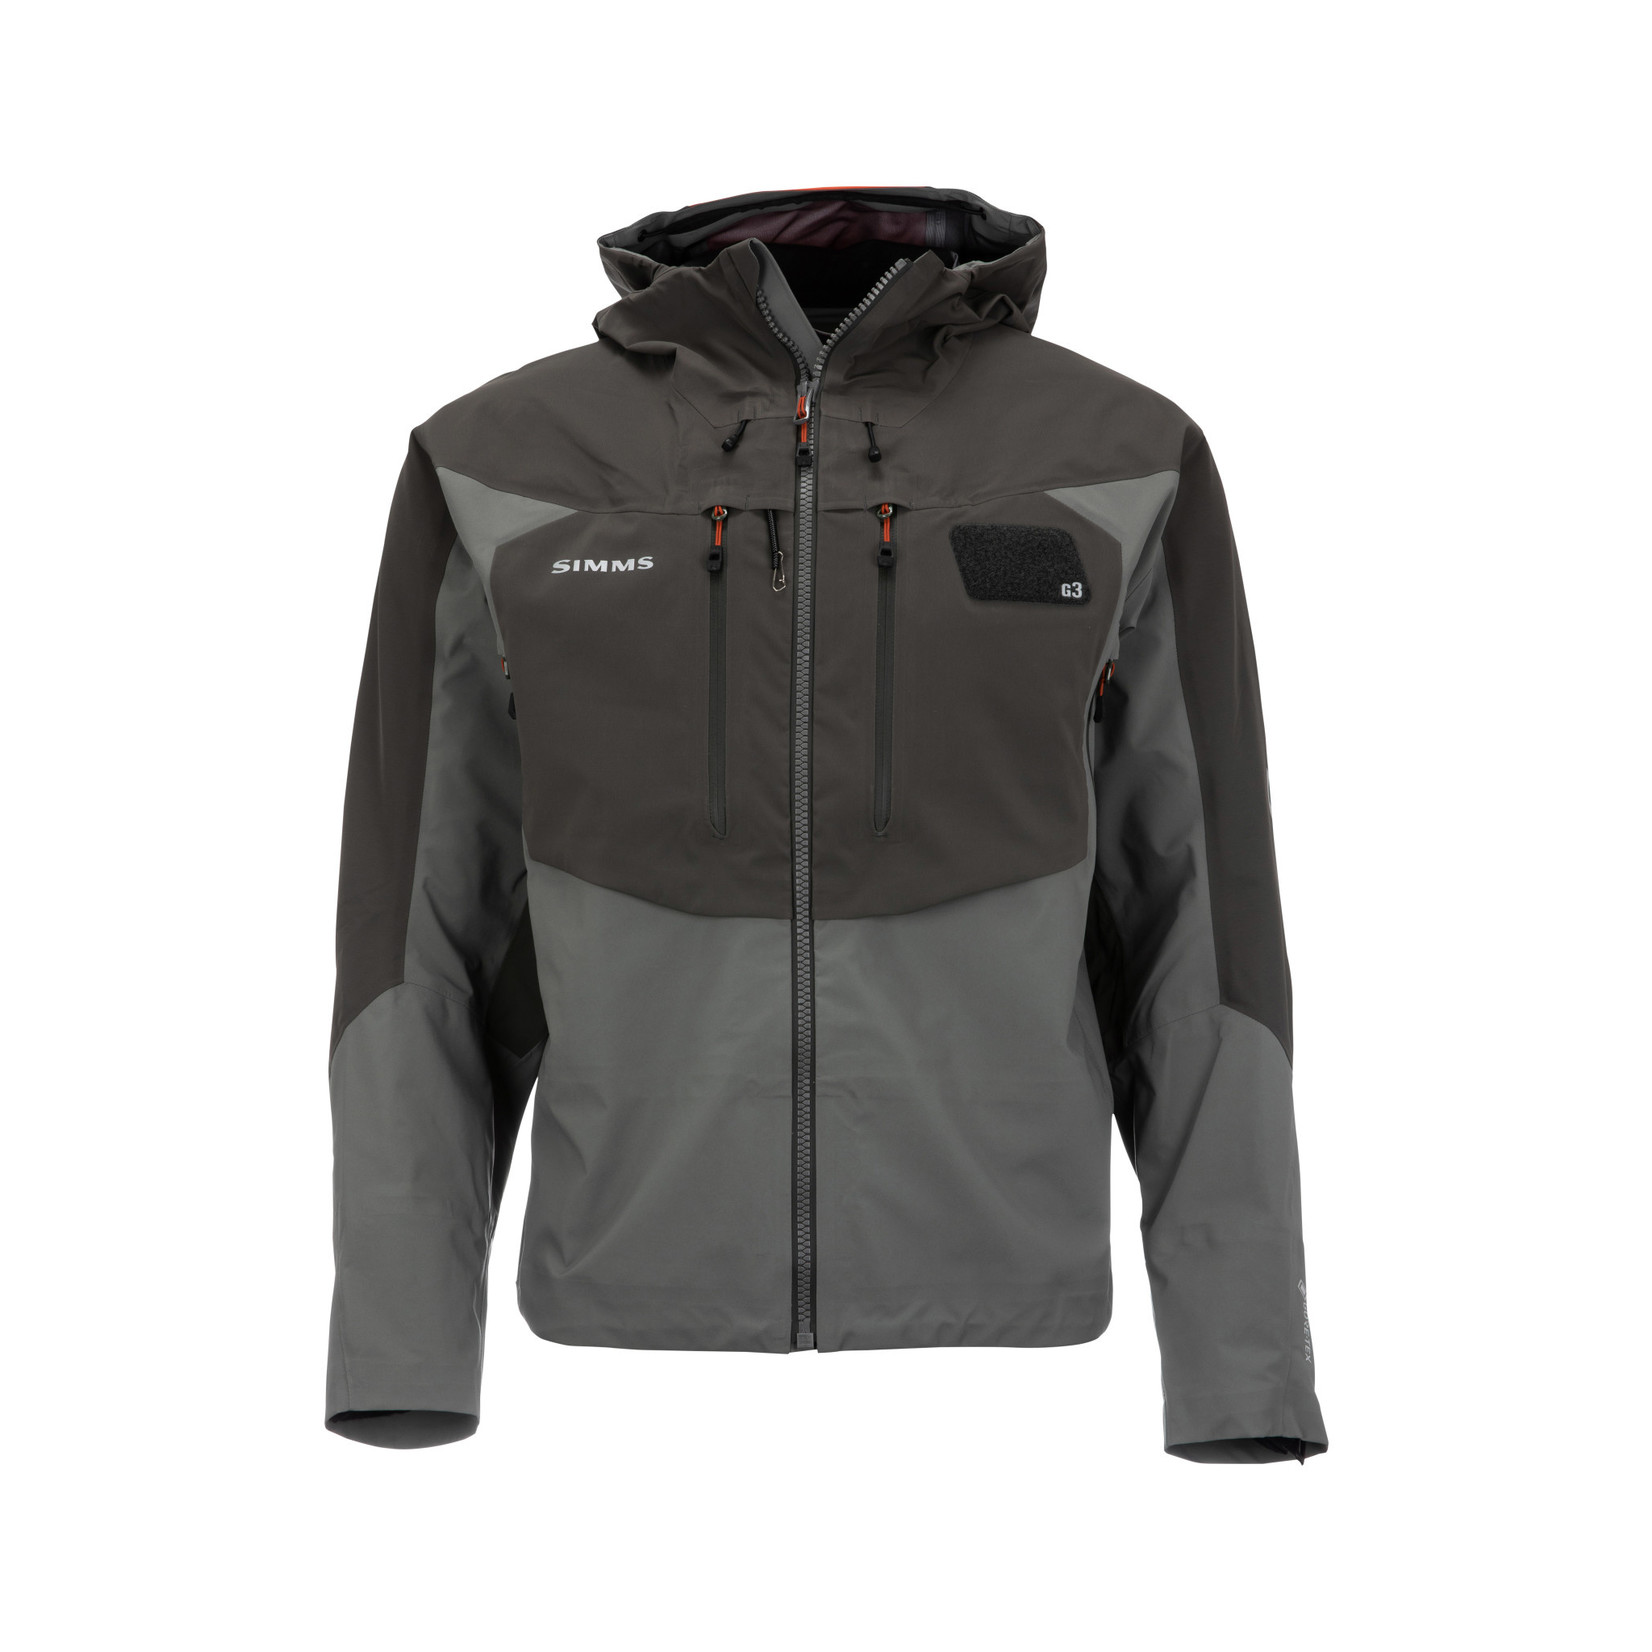 Simms G3 Guide Jacket -